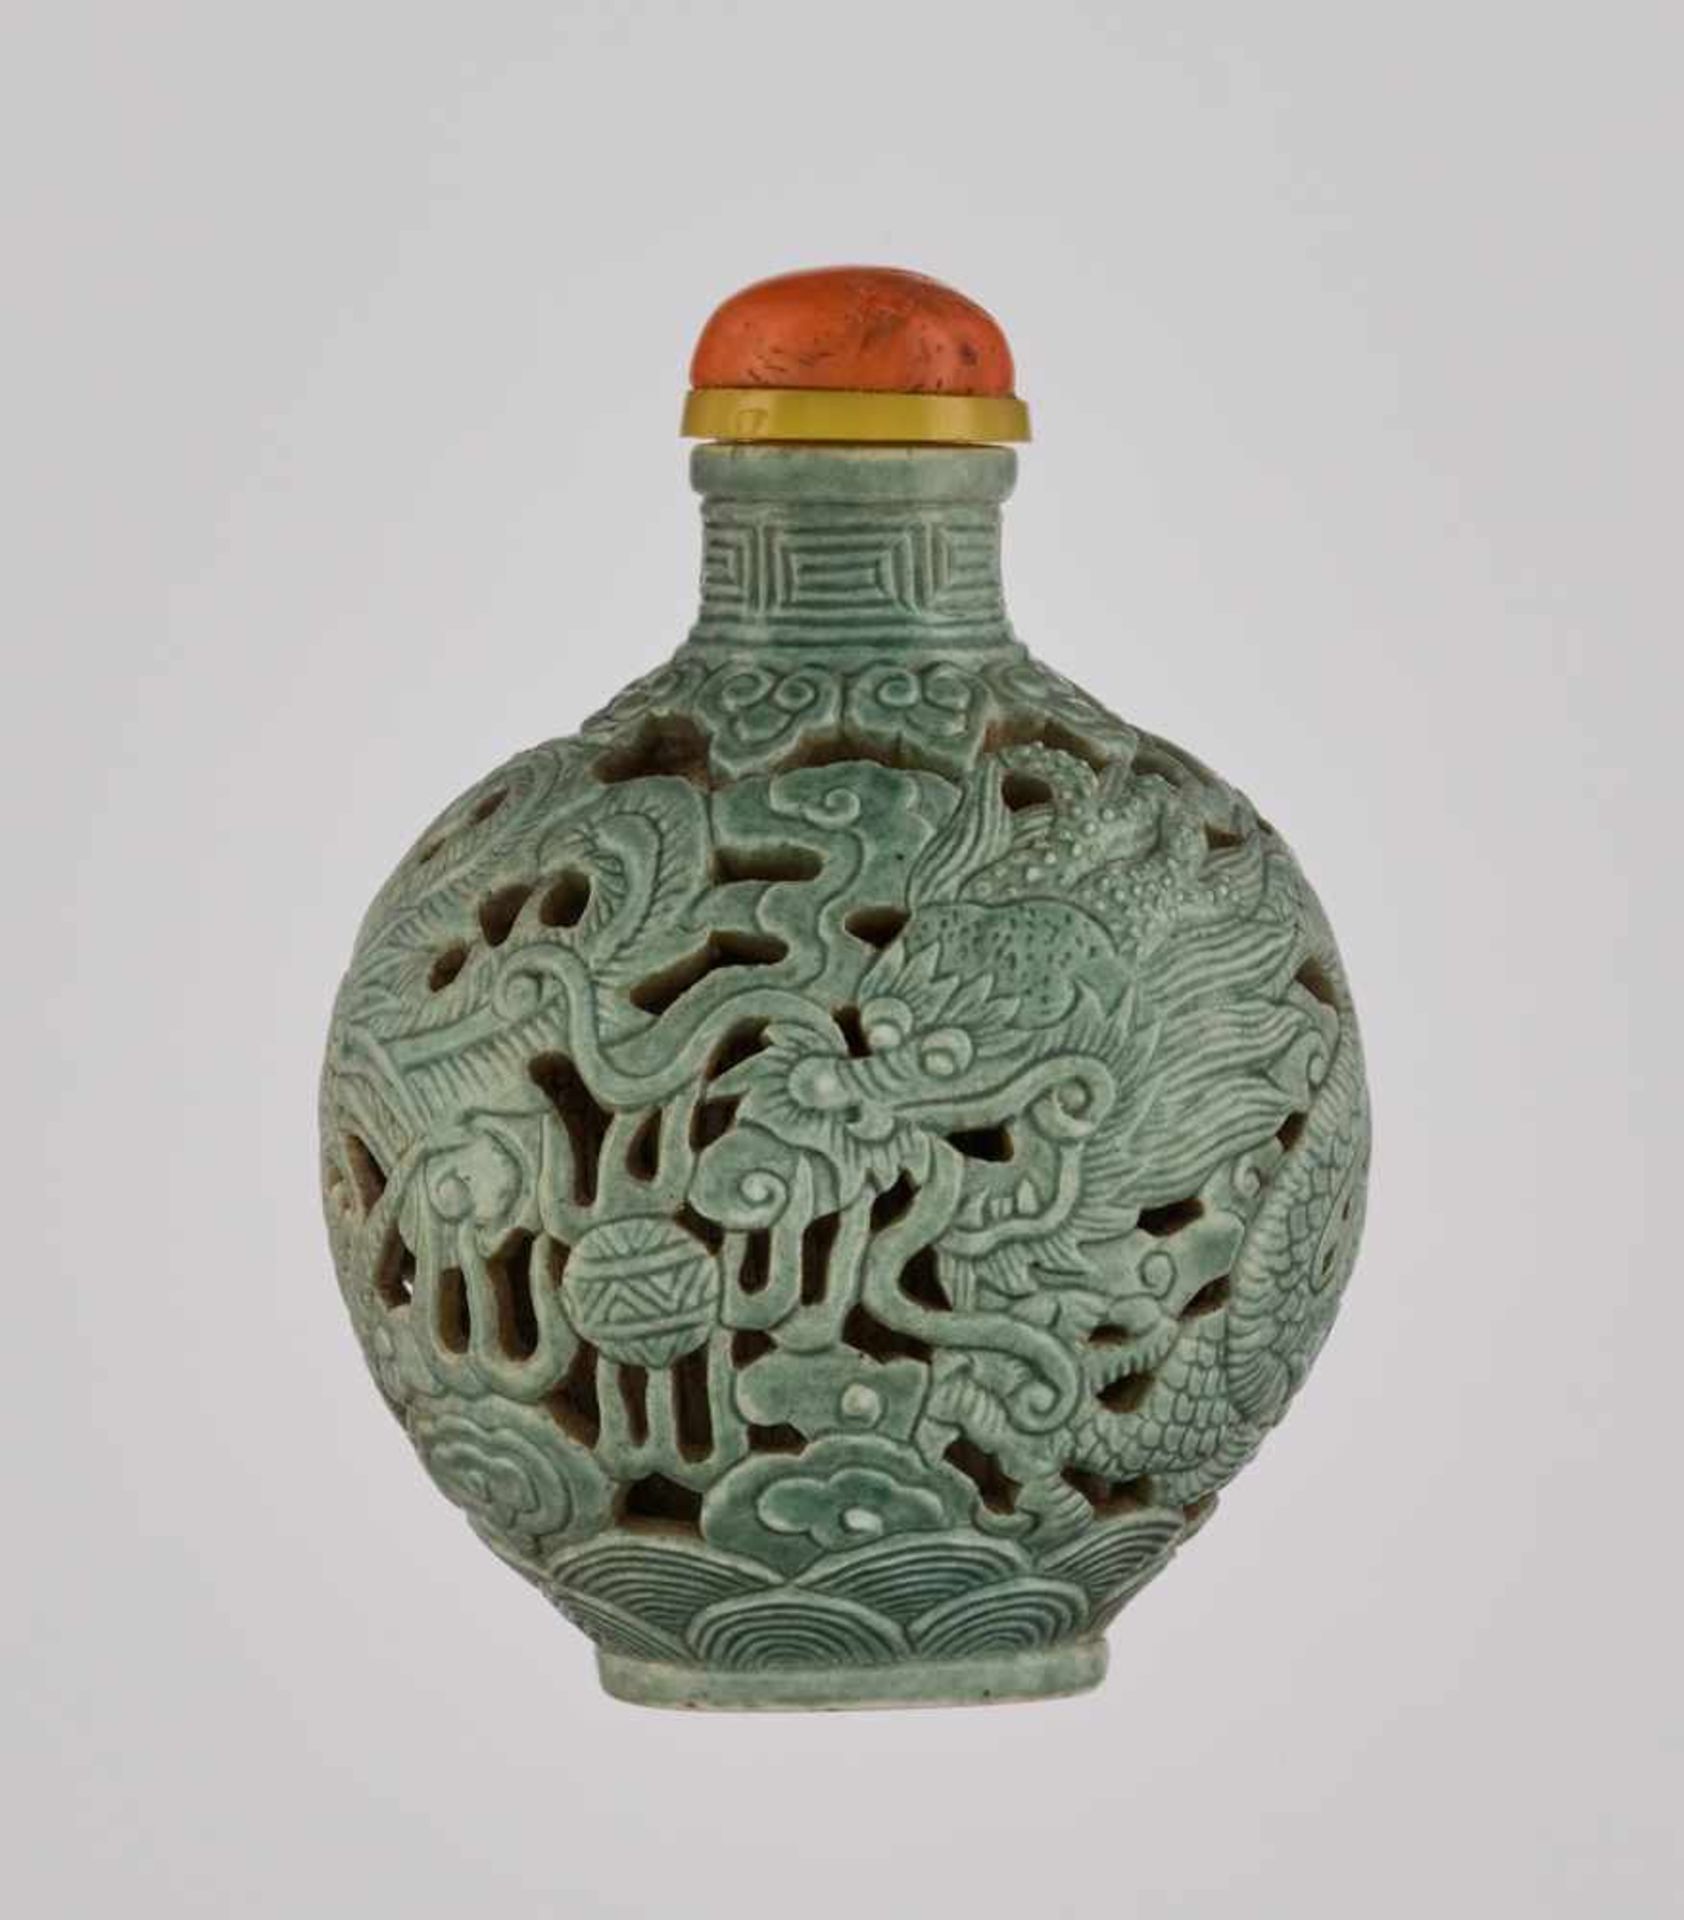 A RETICULATED TURQUOISE-GLAZED ‘DRAGON & PHOENIX’ PORCELAIN SNUFF BOTTLE Molded and carved porcelain